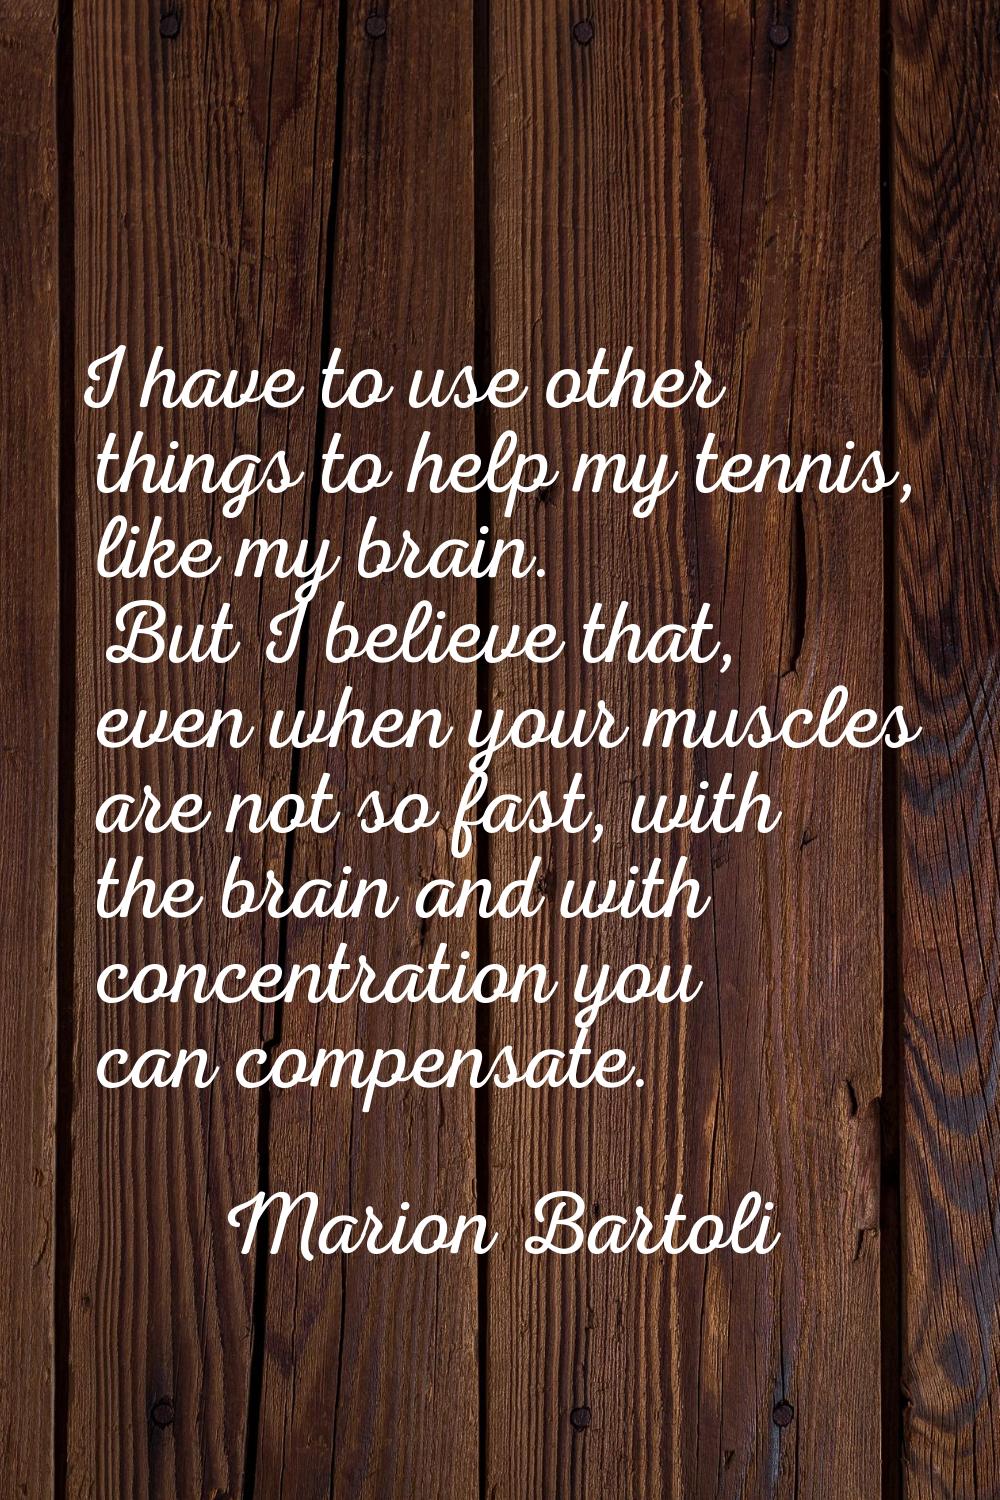 I have to use other things to help my tennis, like my brain. But I believe that, even when your mus